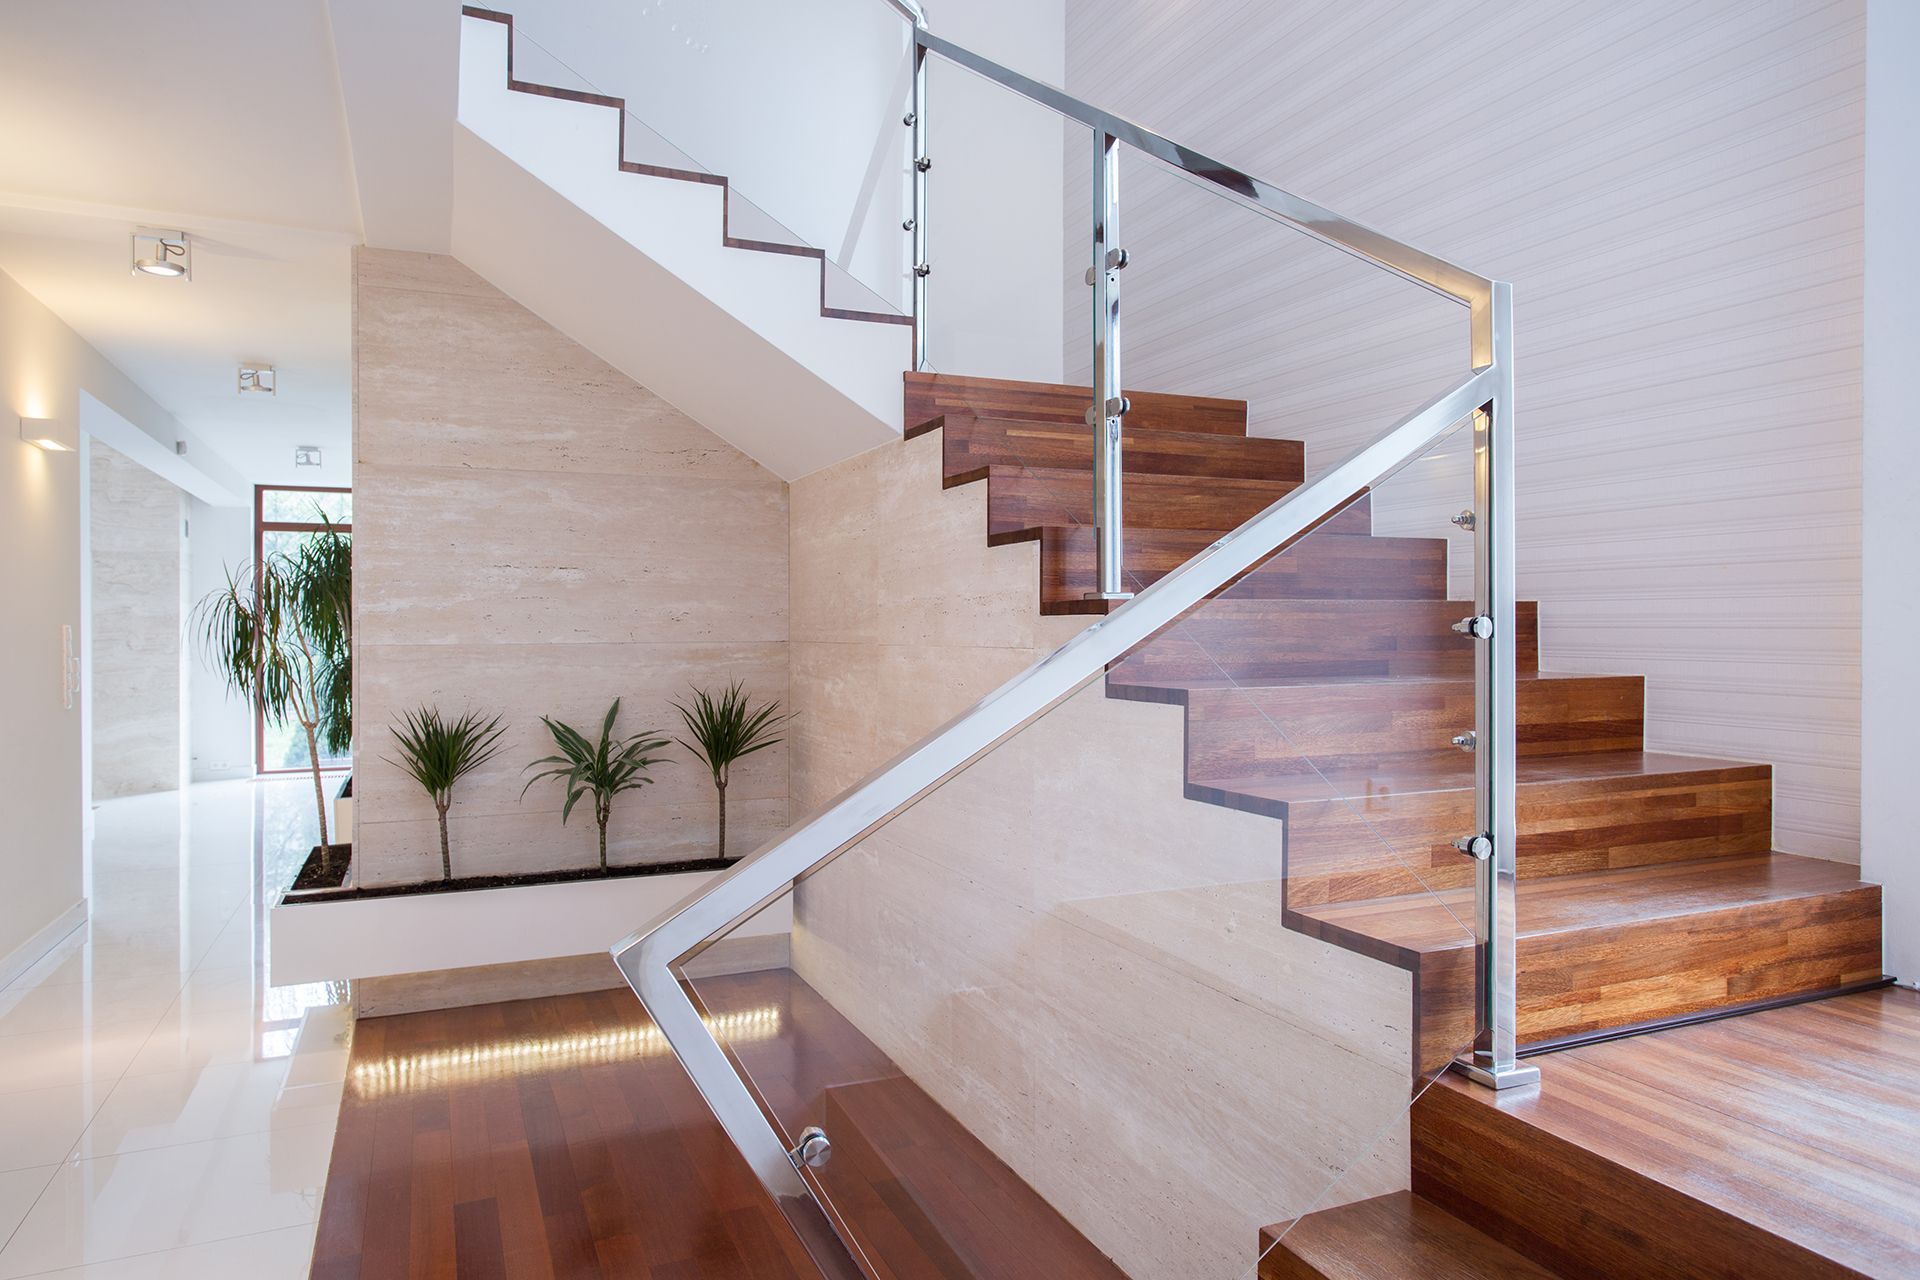 image stylish staircase bright house interior